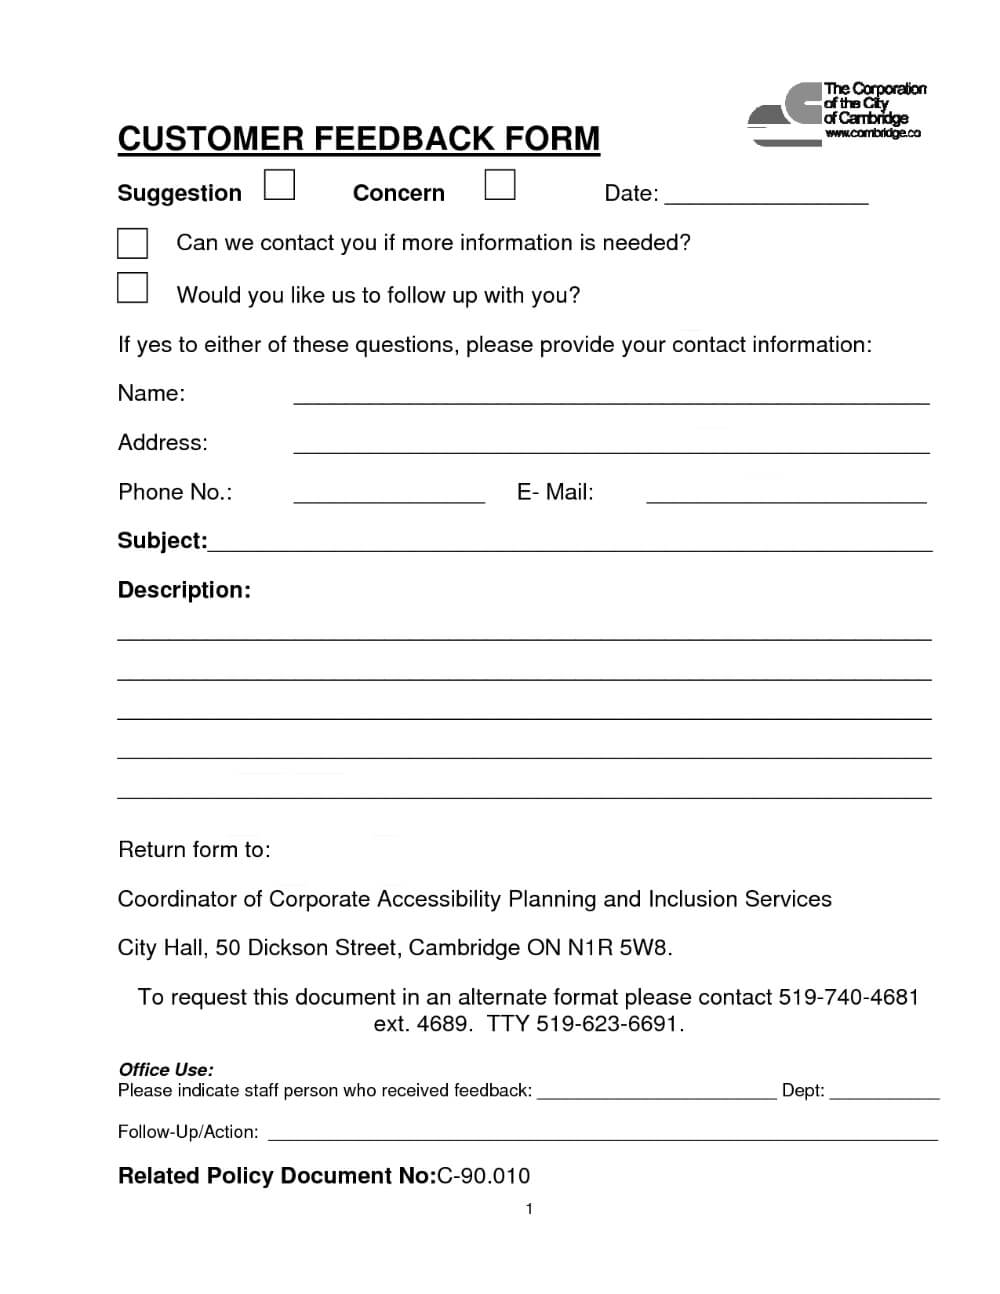 Customer Contact Form | Customer Feedback Form (Pdf Download For Word Employee Suggestion Form Template